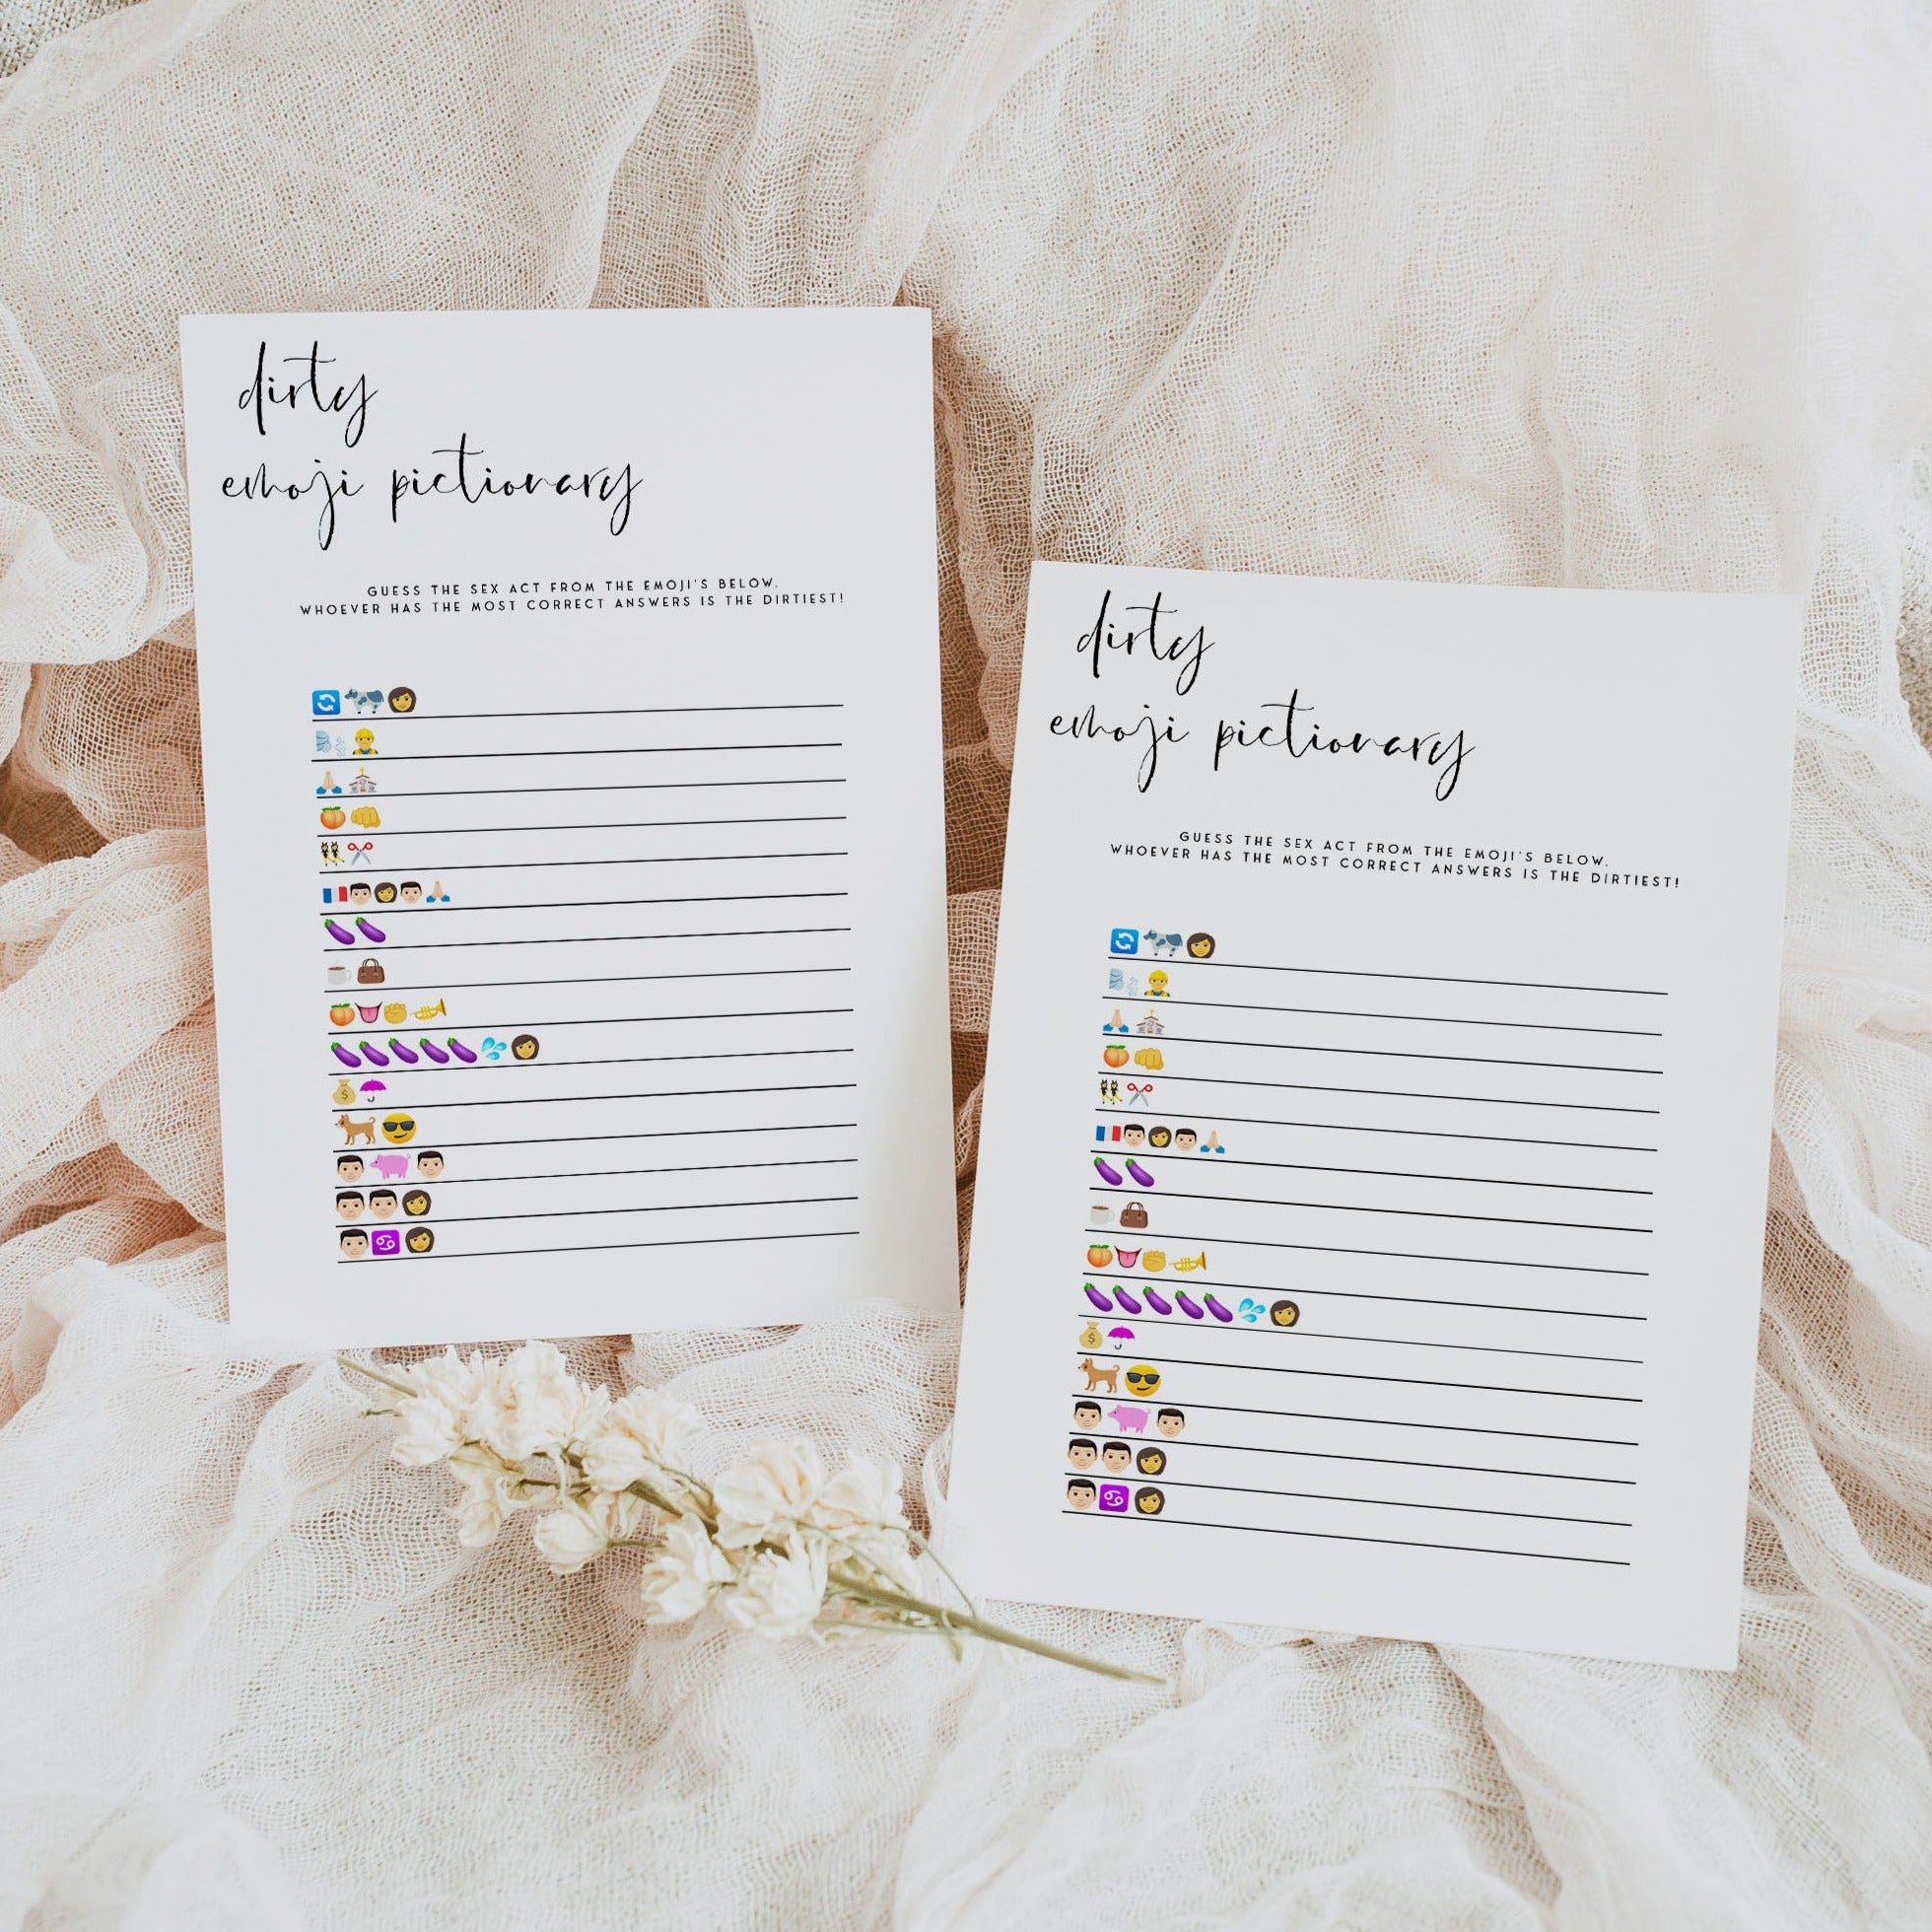 Fully editable and printable bridal shower dirty emoji pictionary game with a modern minimalist design. Perfect for a modern simple bridal shower themed party